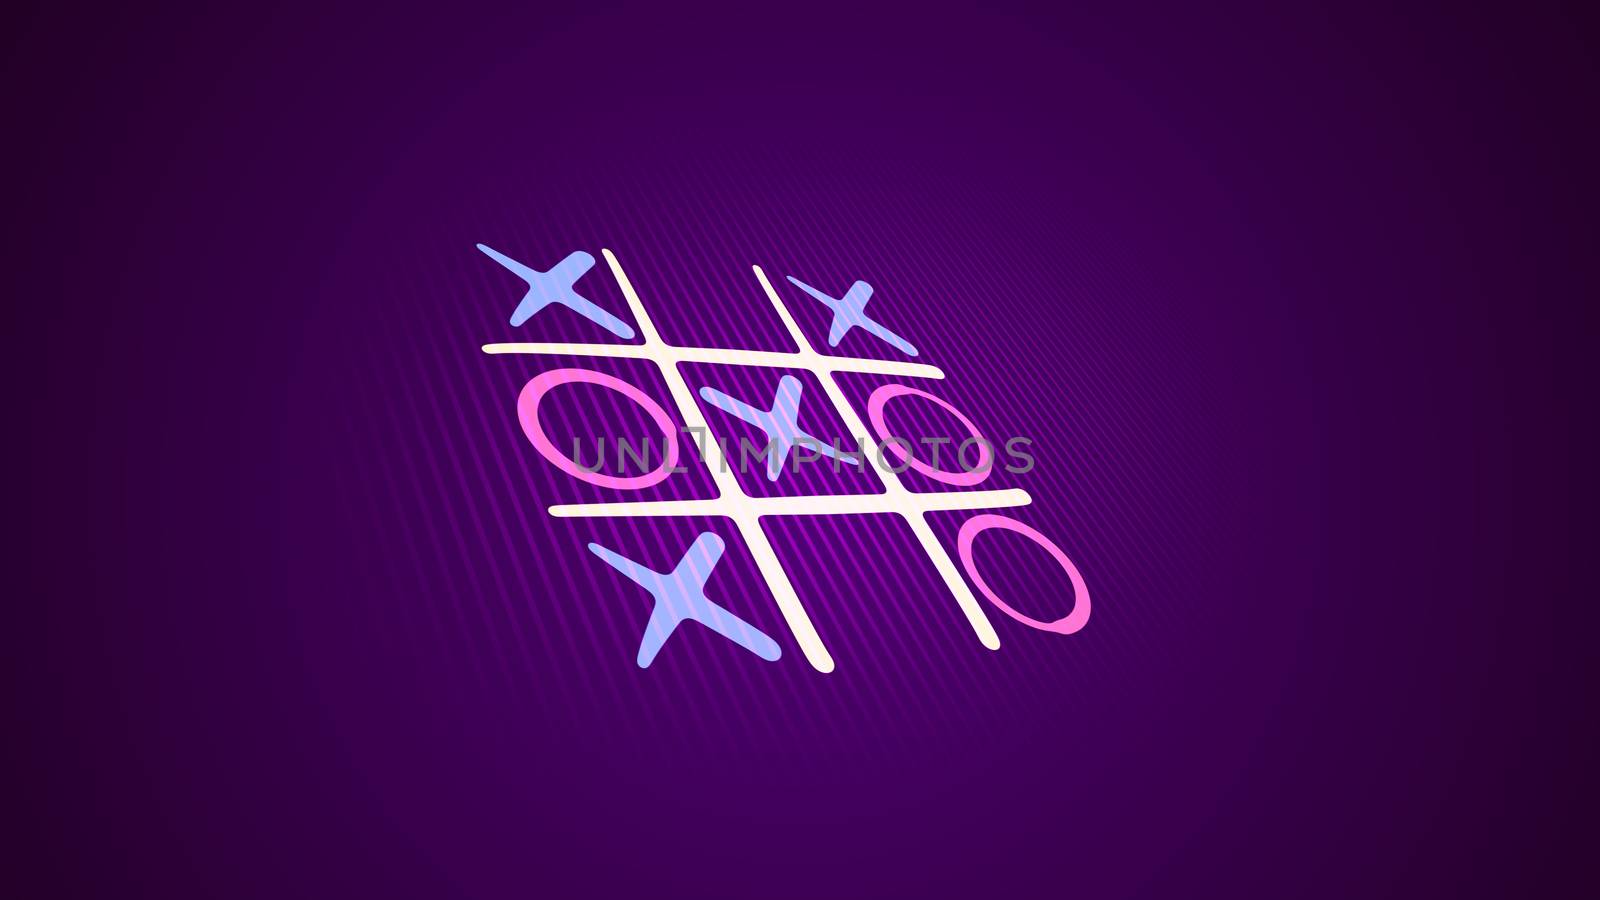 Tic-tac toe picture in the violet backdrop by klss